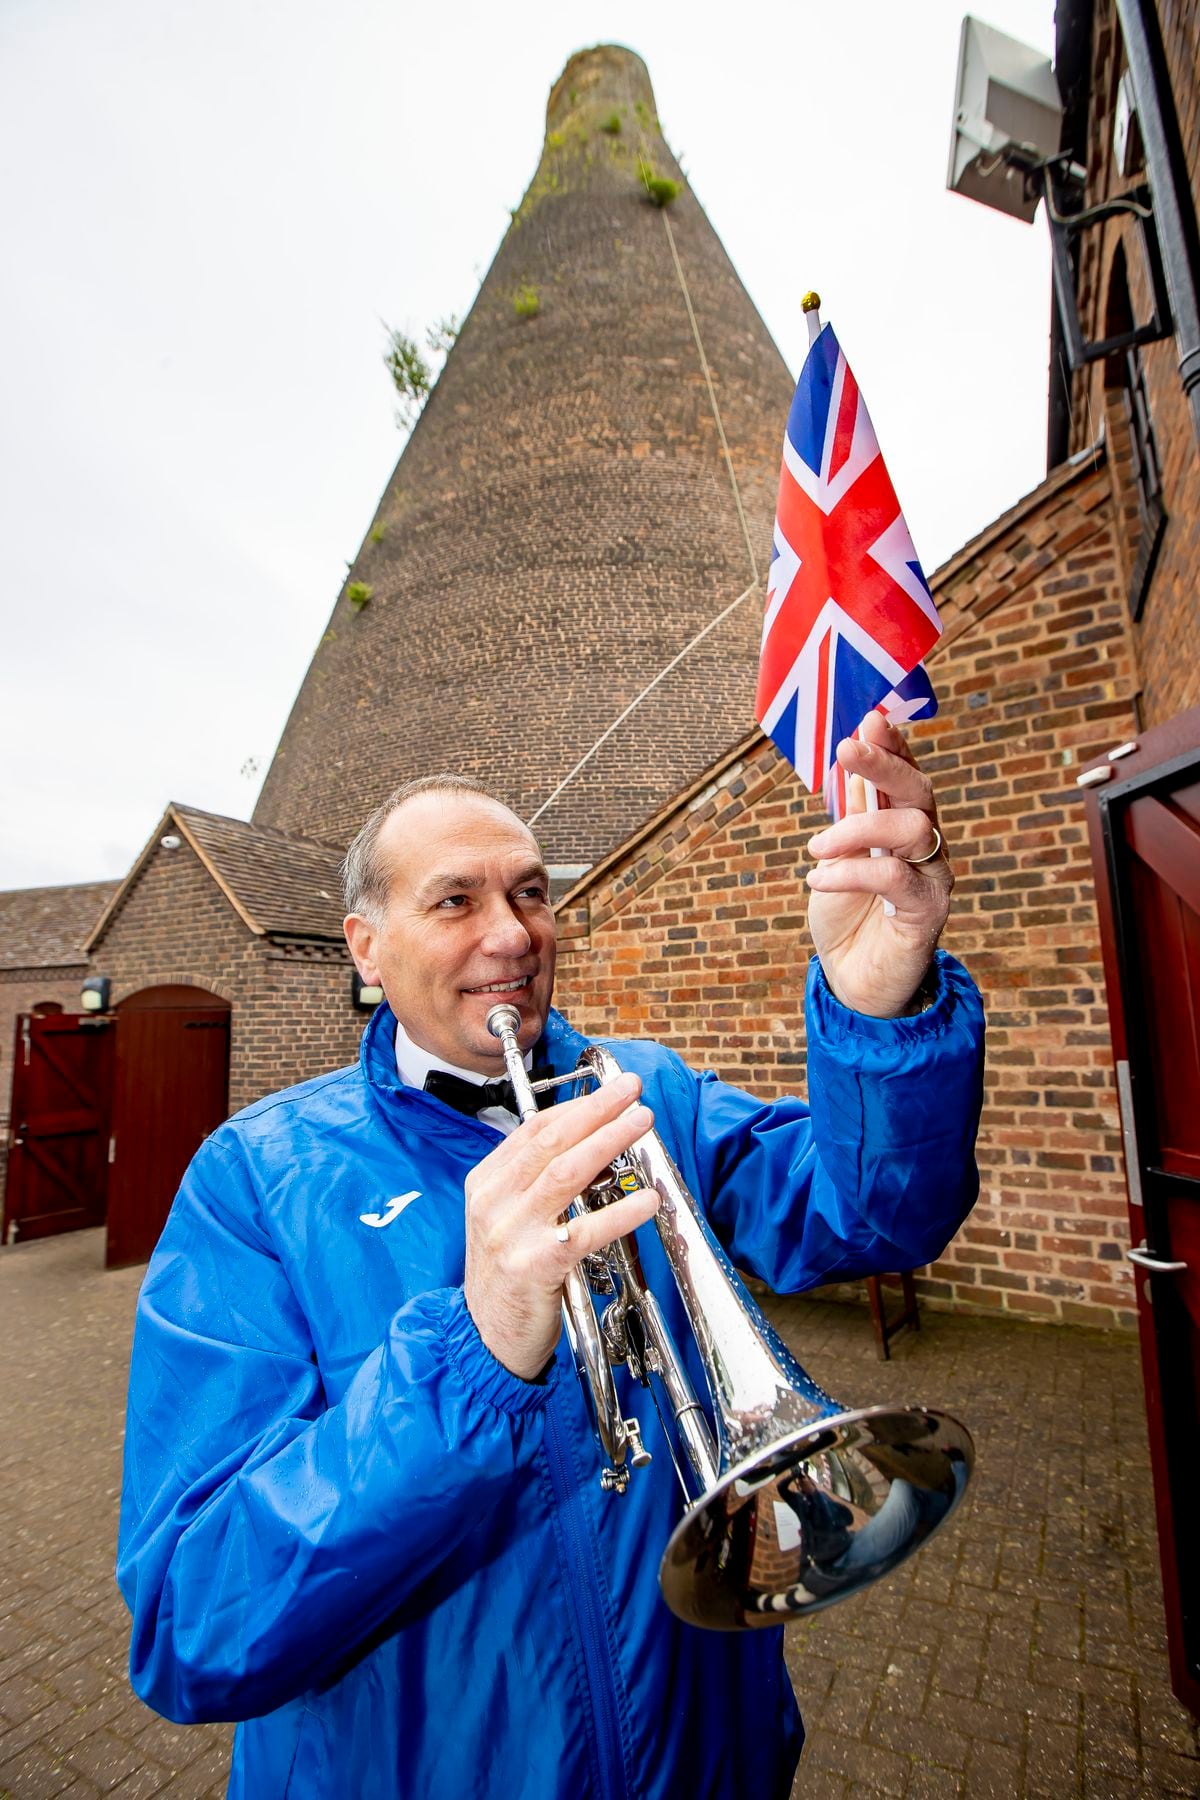 The Red House Glass Cone in Stourbridge has been celebrating the Queen's Jubilee with Black Country Brass. Pictured Keith Hedges, Principal Cornet with Black Country Brass.